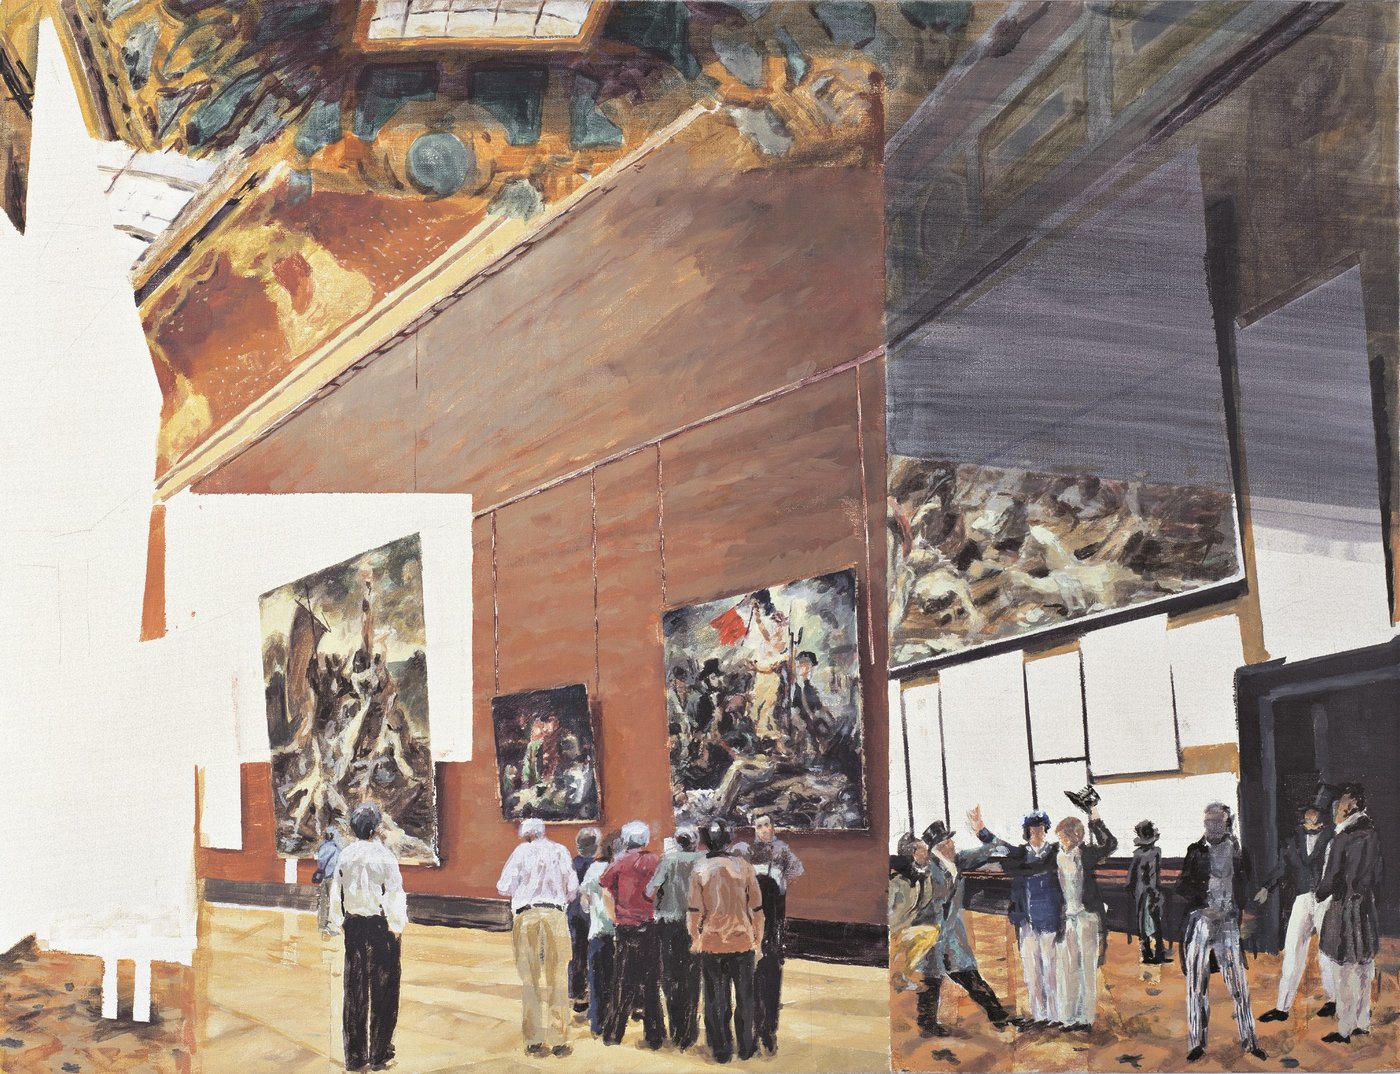 Groups of people in a museum in front of large paintings on the wall